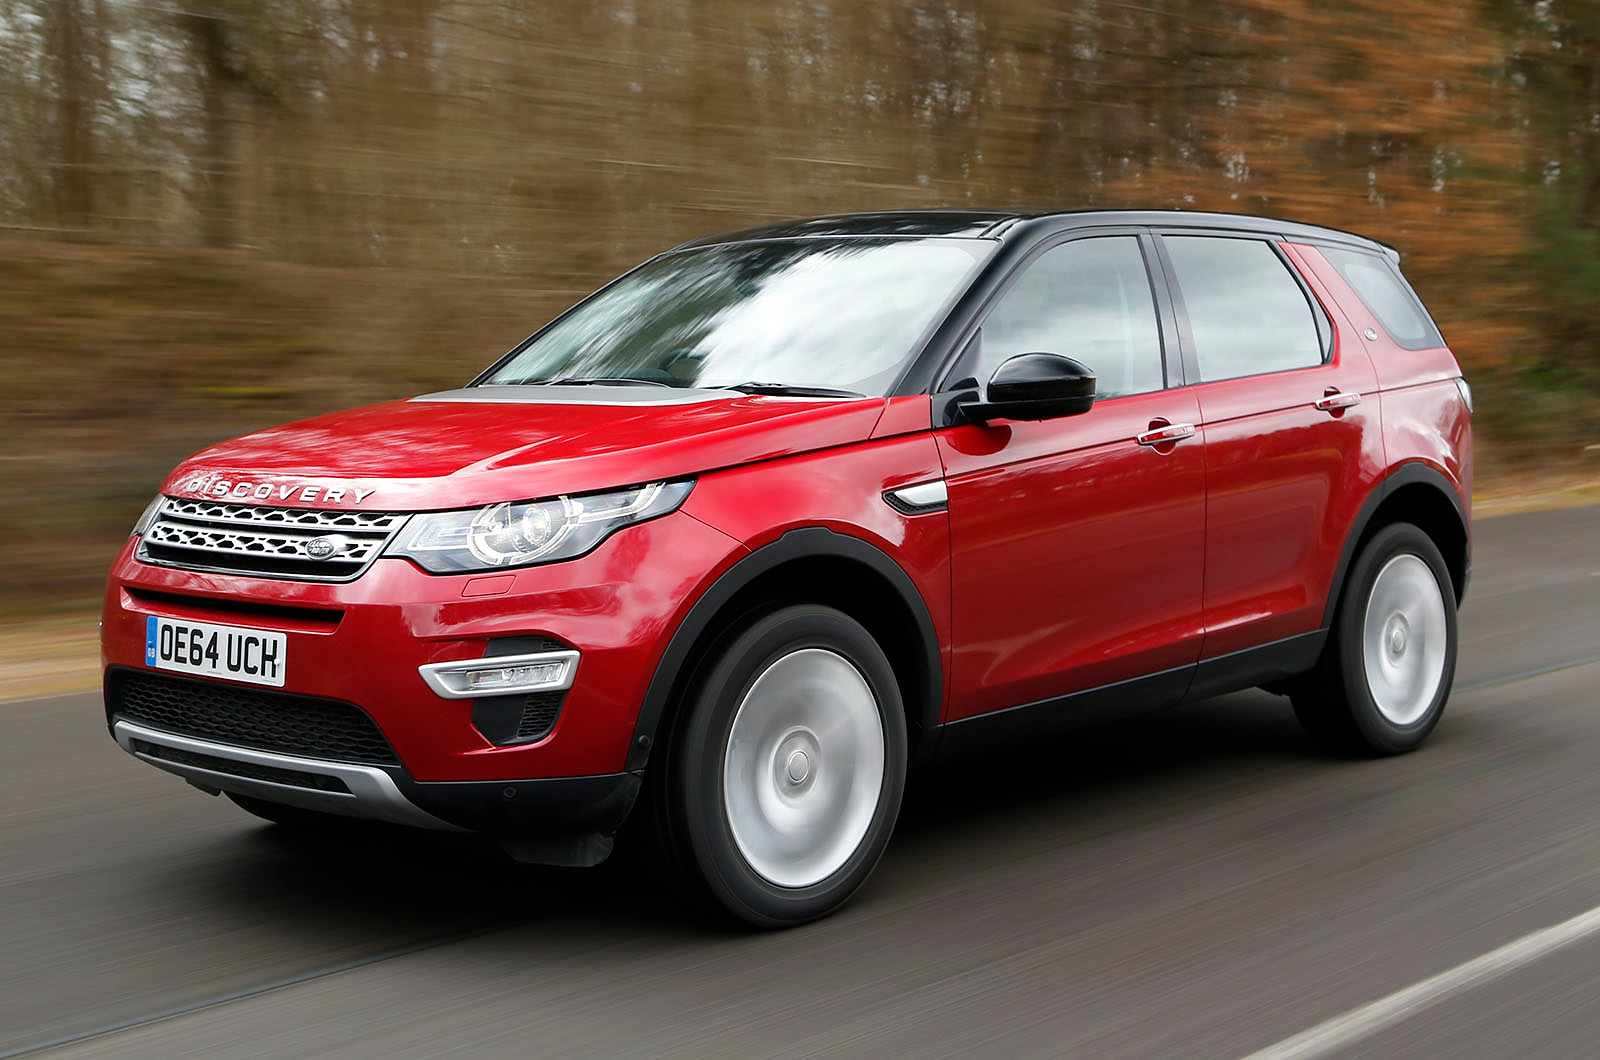 The Land Rover Discovery Sport